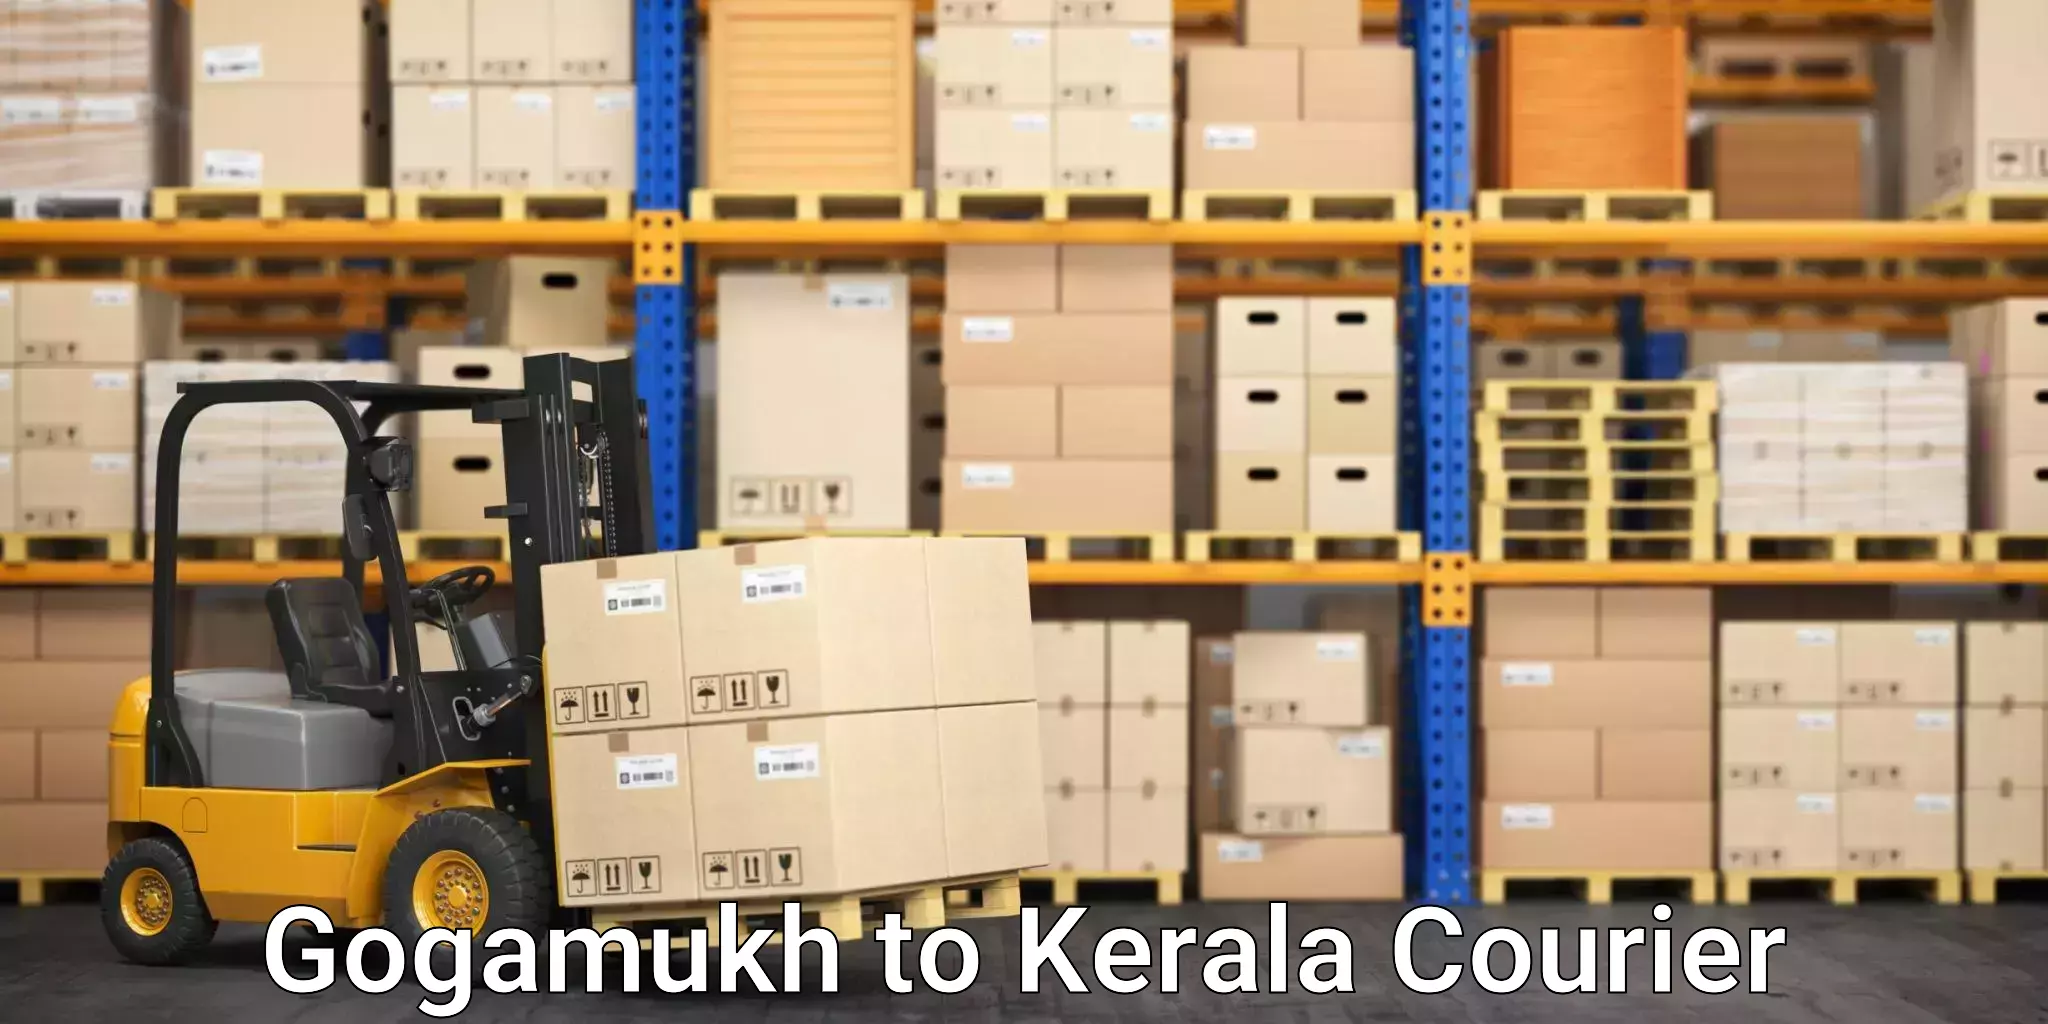 Multi-national courier services Gogamukh to Anjumoorthy